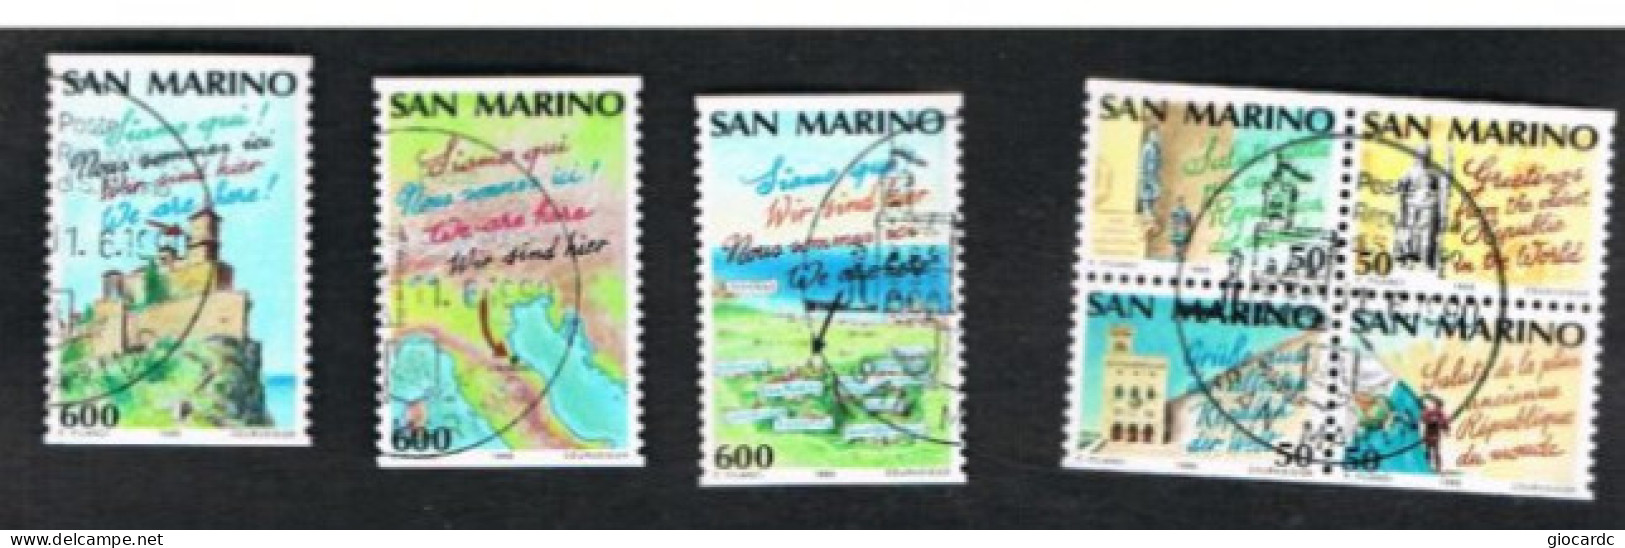 SAN MARINO UN 1289.1295  - 1990 ANNO DEL TURISMO (COMPLET SET OF 7 STAMPS, 4 SE-TENANT - BY BOOKLET)  - USED - Usati